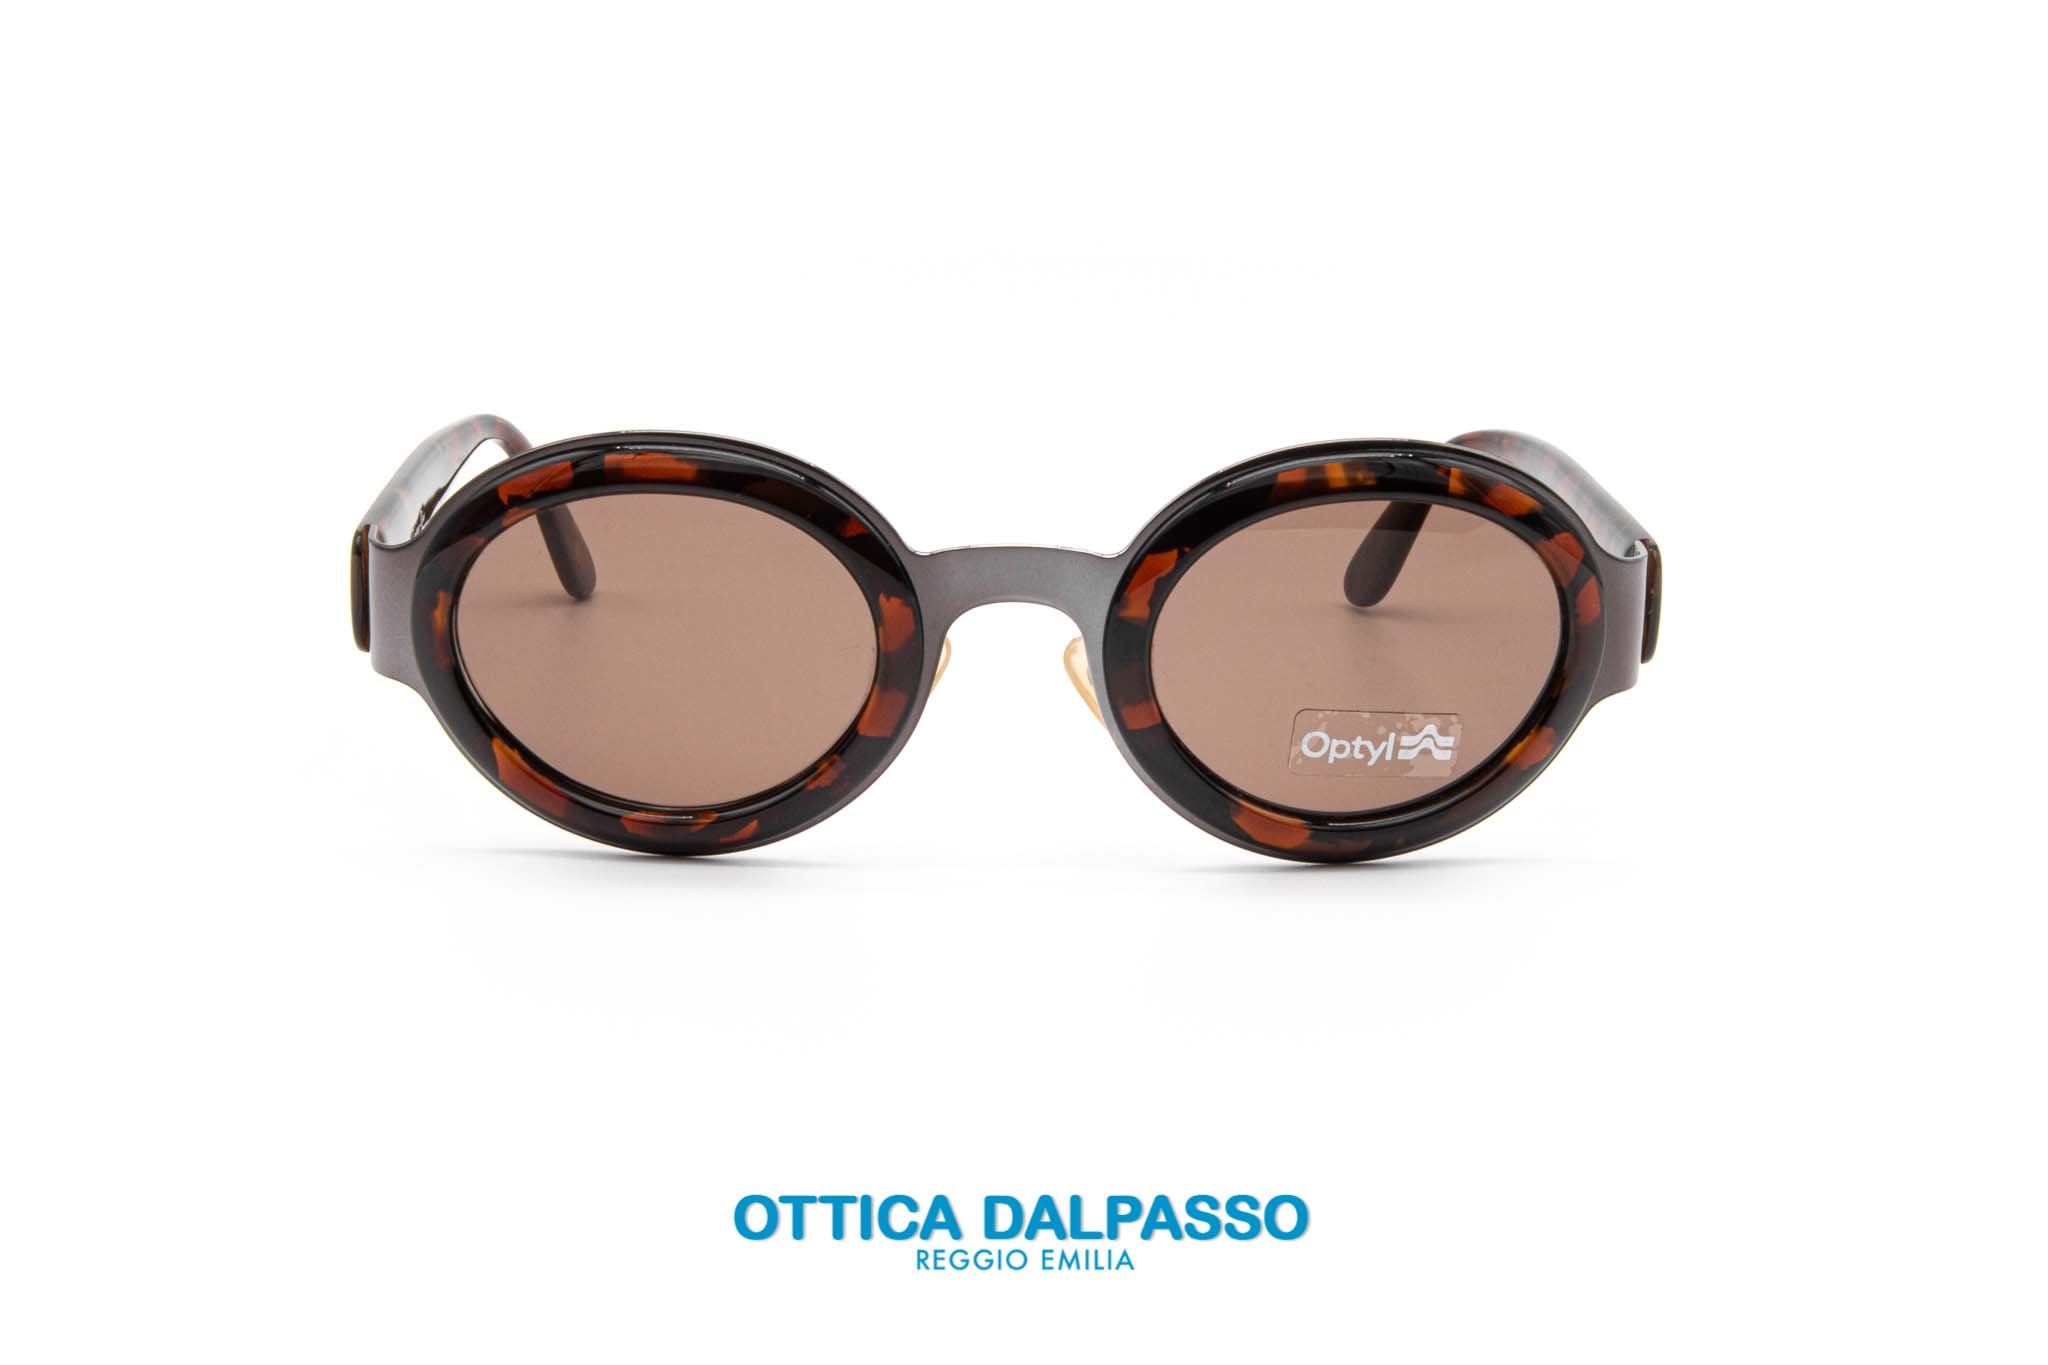 Dior spectacles eyewear Womens Fashion Watches  Accessories Sunglasses   Eyewear on Carousell